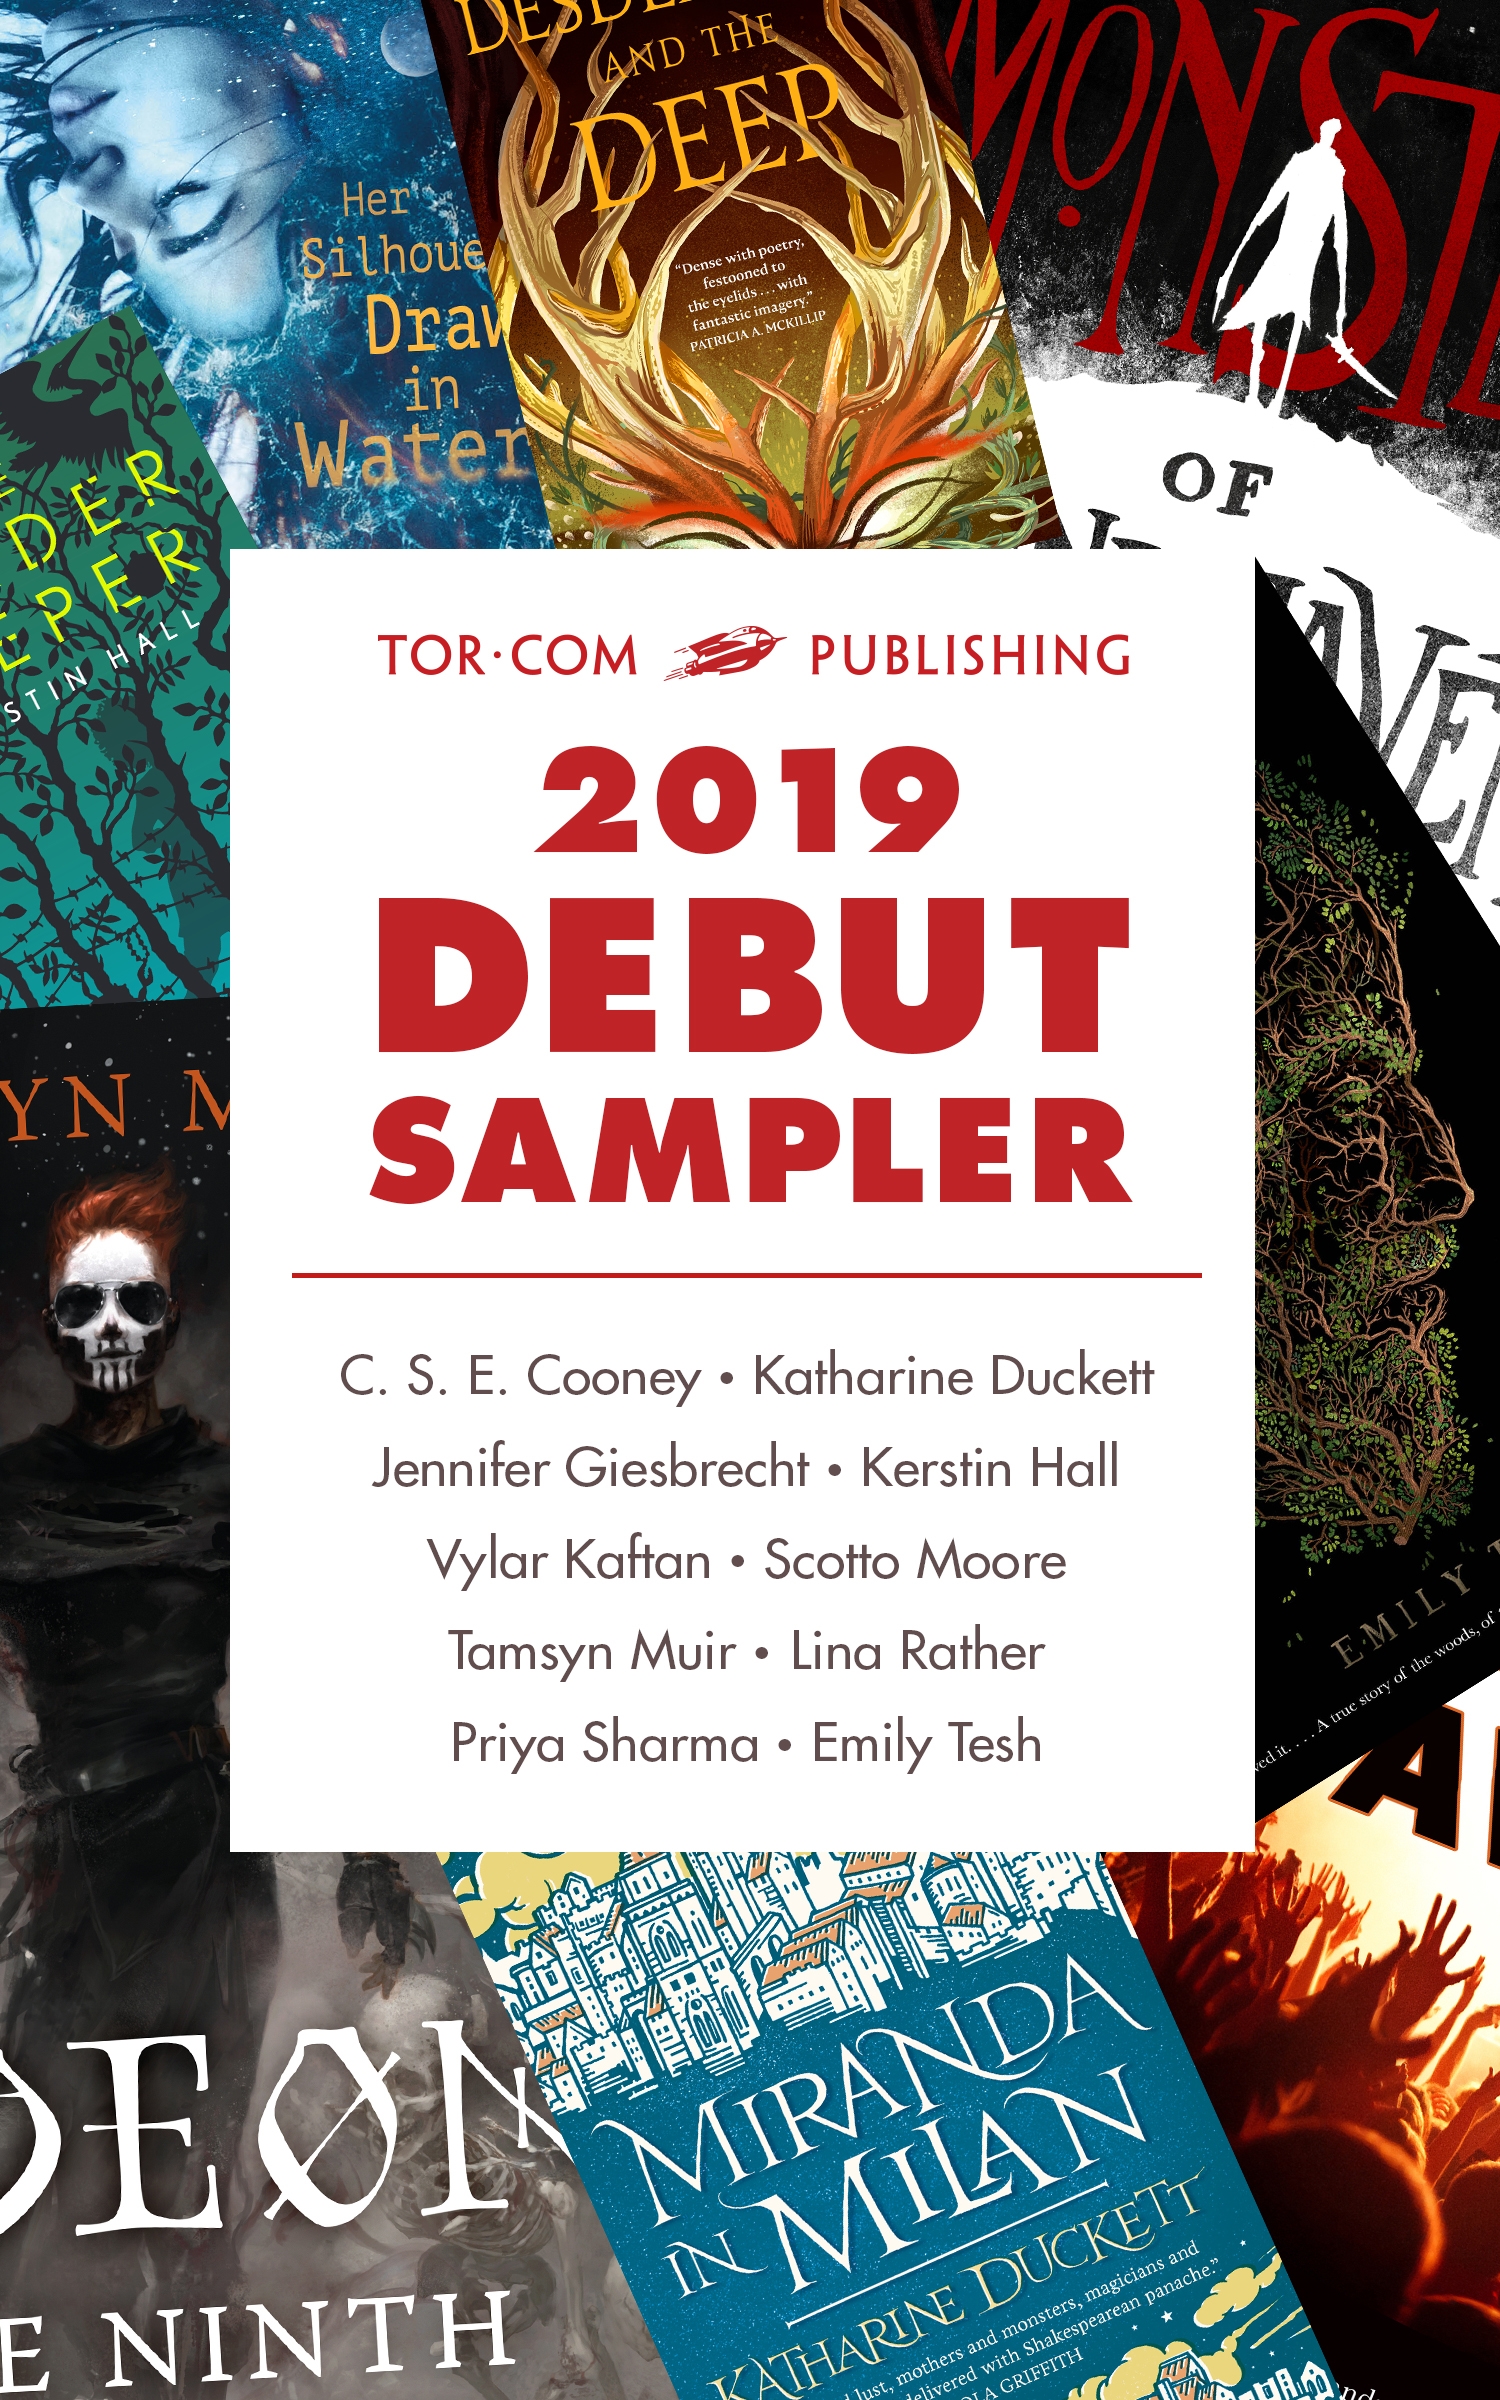 Tor.com Publishing 2019 Debut Sampler : Some of the Most Exciting New Voices in Science Fiction and Fantasy by C. S. E. Cooney, Katharine Duckett, Jennifer Giesbrecht, Kerstin Hall, Vylar Kaftan, Scotto Moore, Tamsyn Muir, Lina Rather